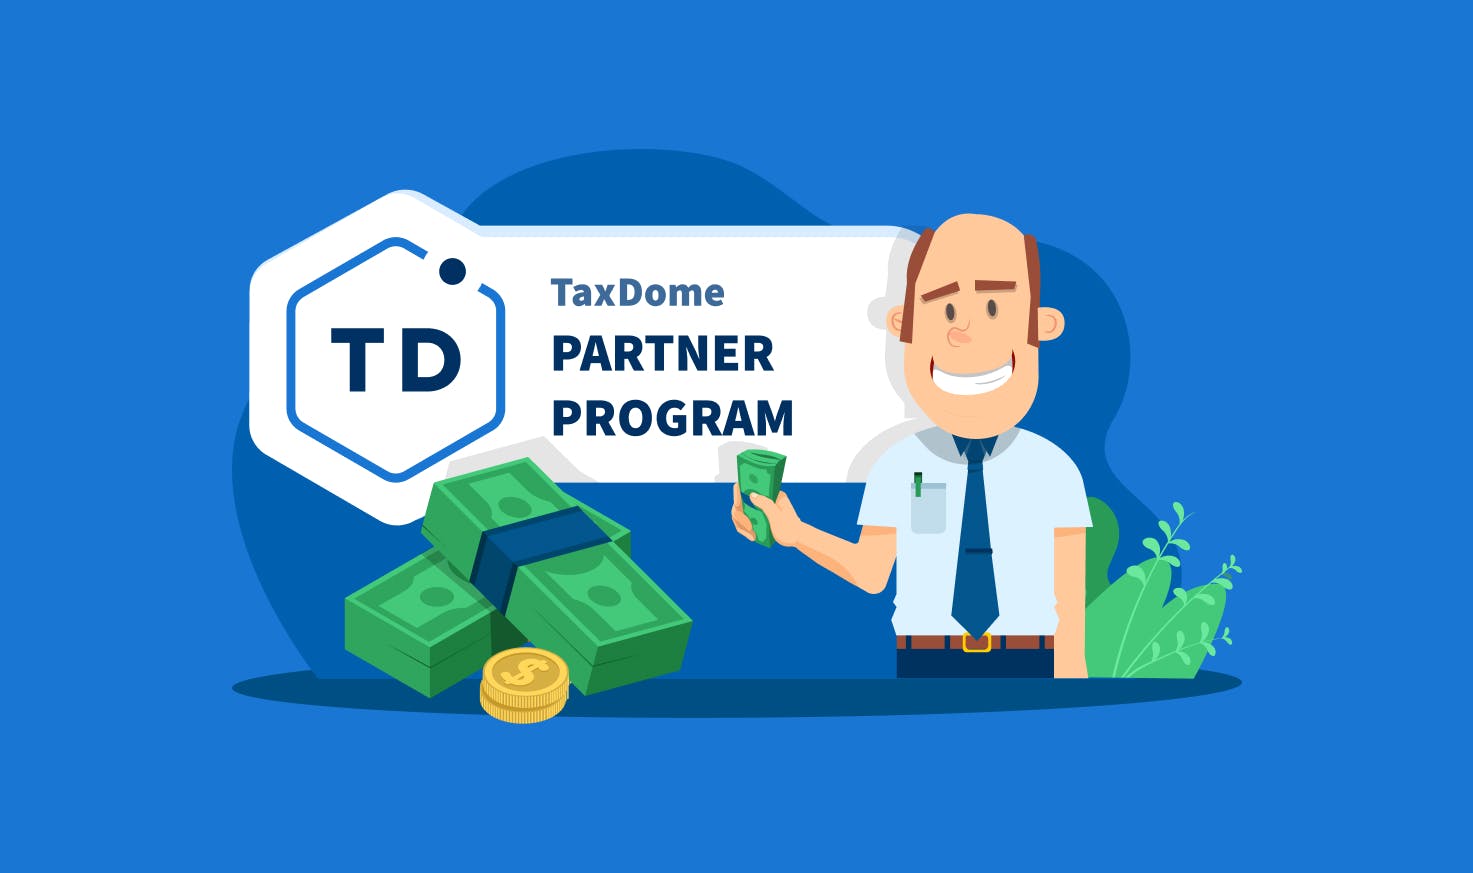 TaxDome Partner Program Officially Launched